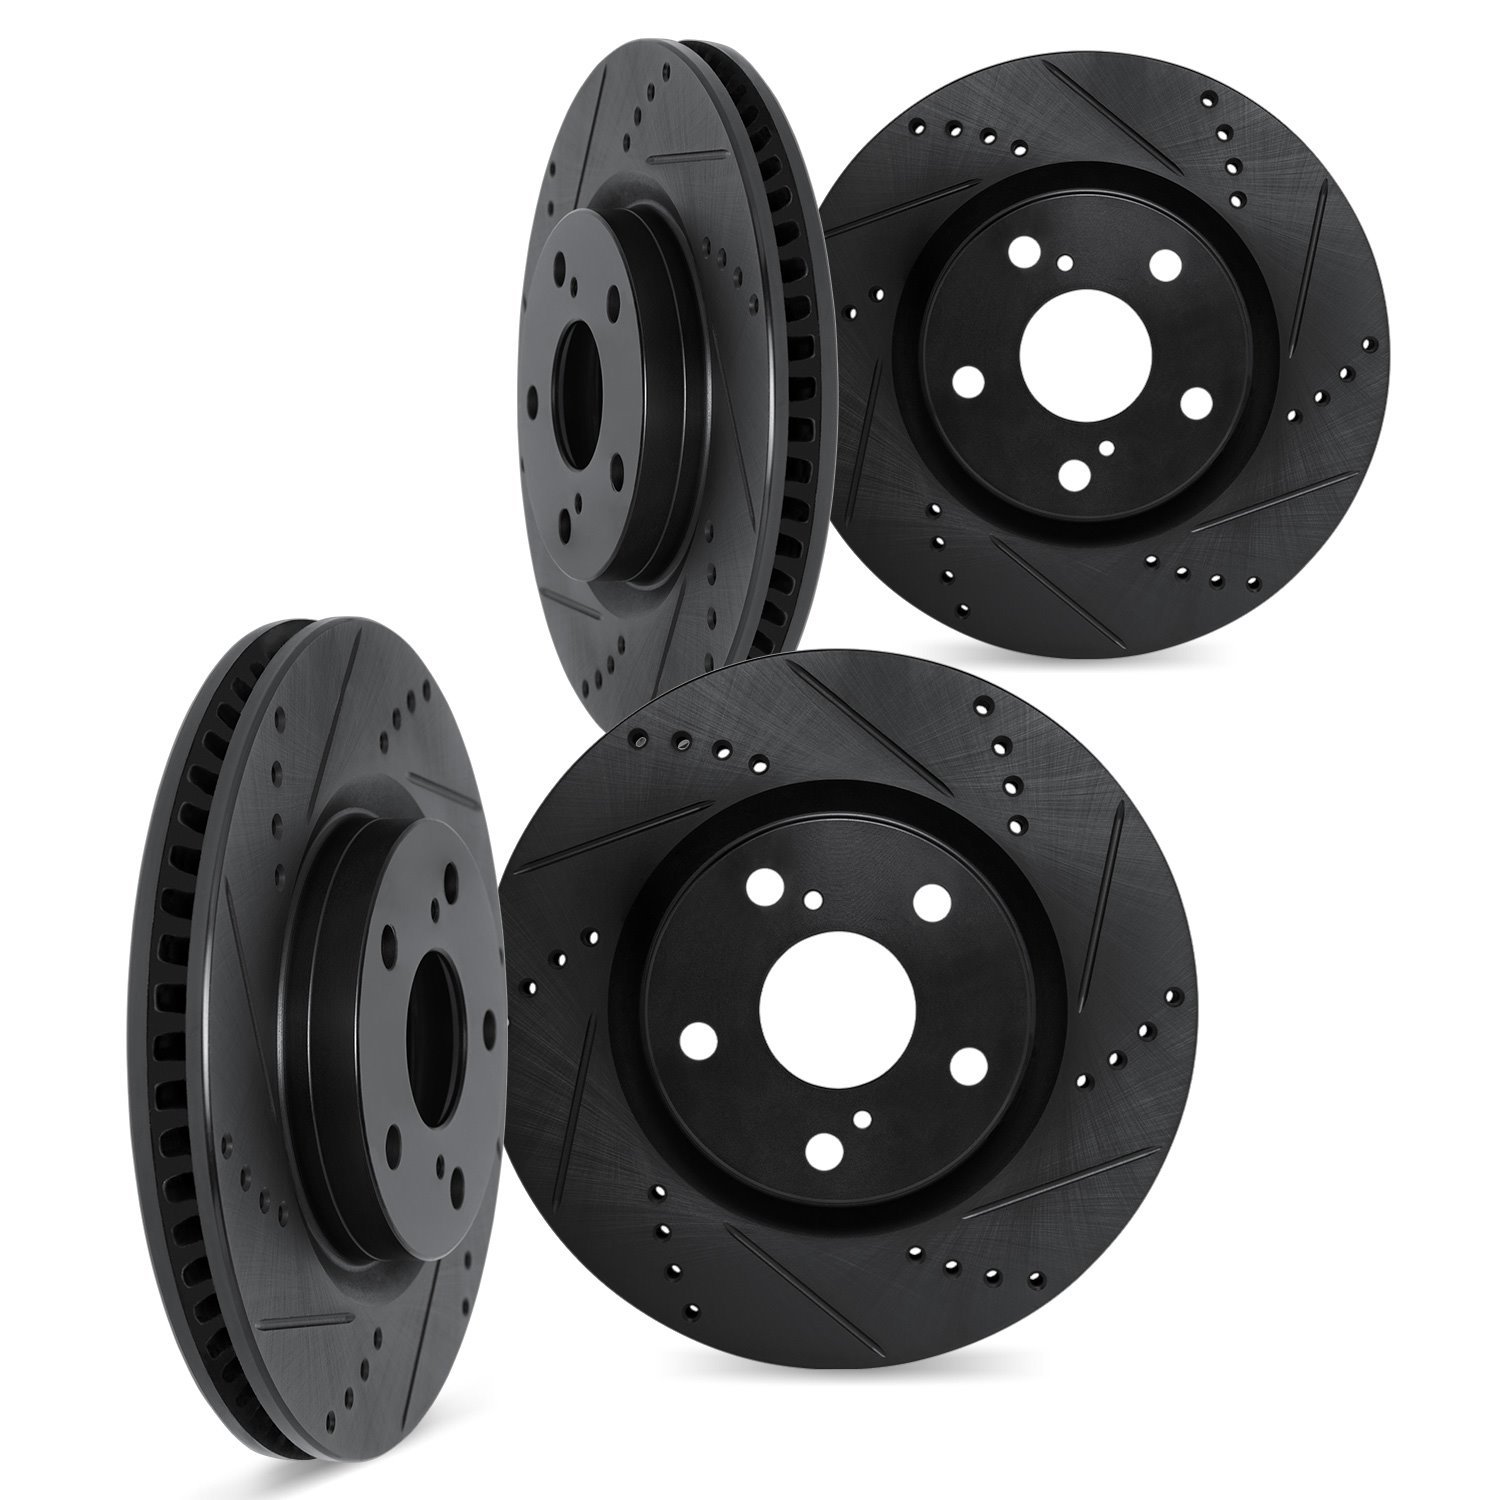 8004-67083 Drilled/Slotted Brake Rotors [Black], Fits Select Infiniti/Nissan, Position: Front and Rear